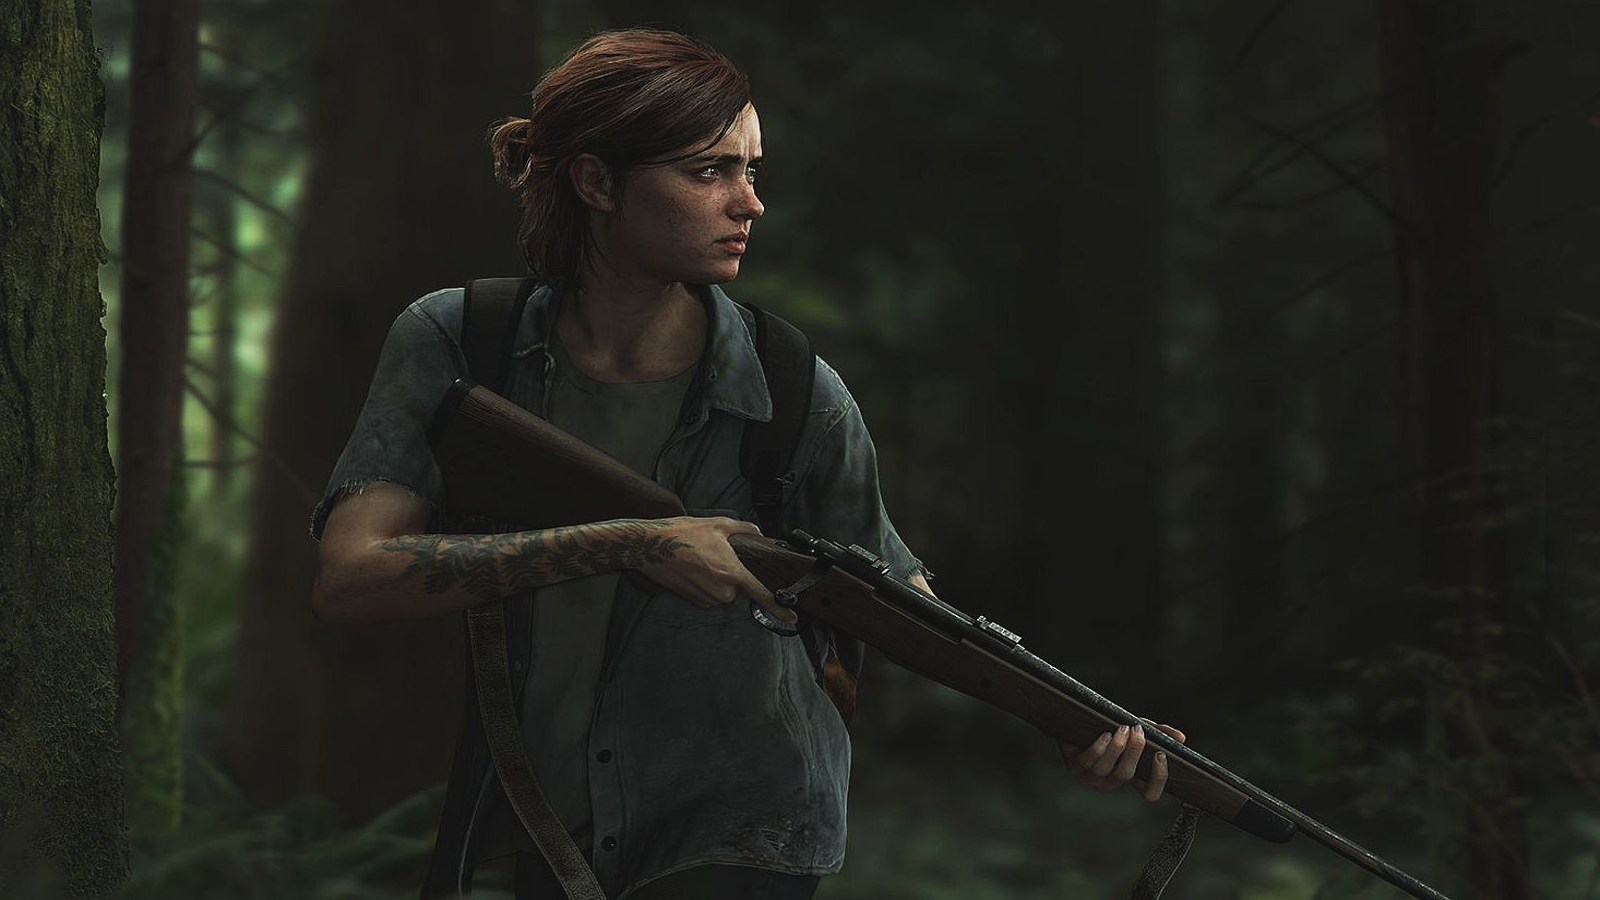 Behind the scenes: One week on the set of The Last of Us Part 2